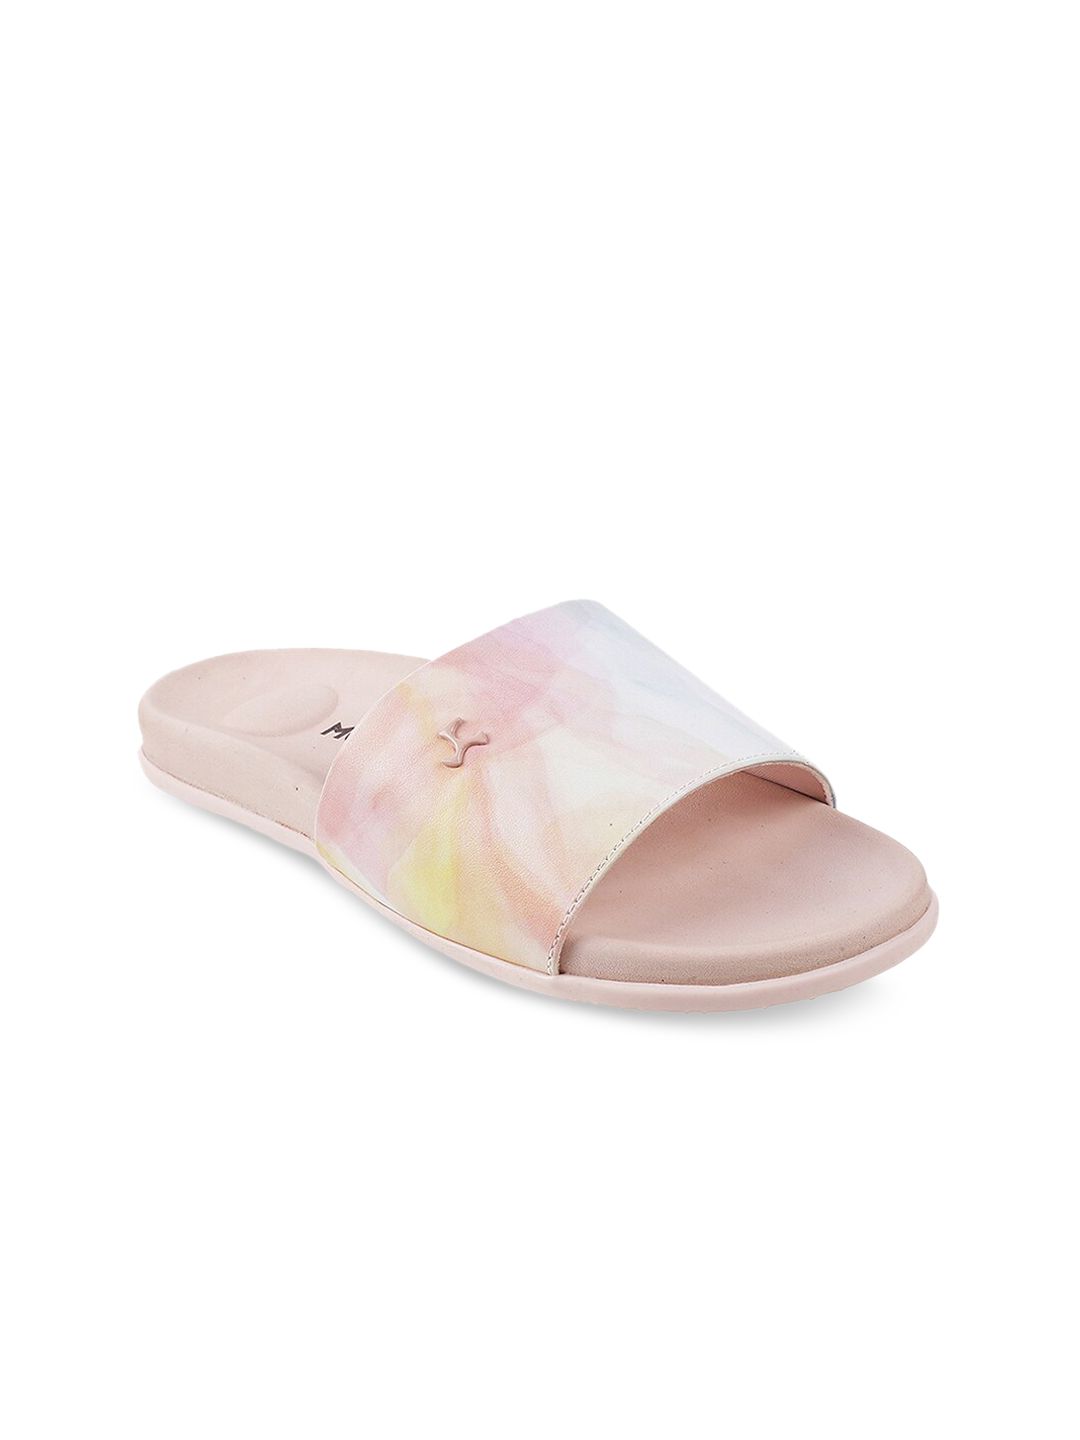 Mochi Women Pink Printed Open Toe Flats Price in India